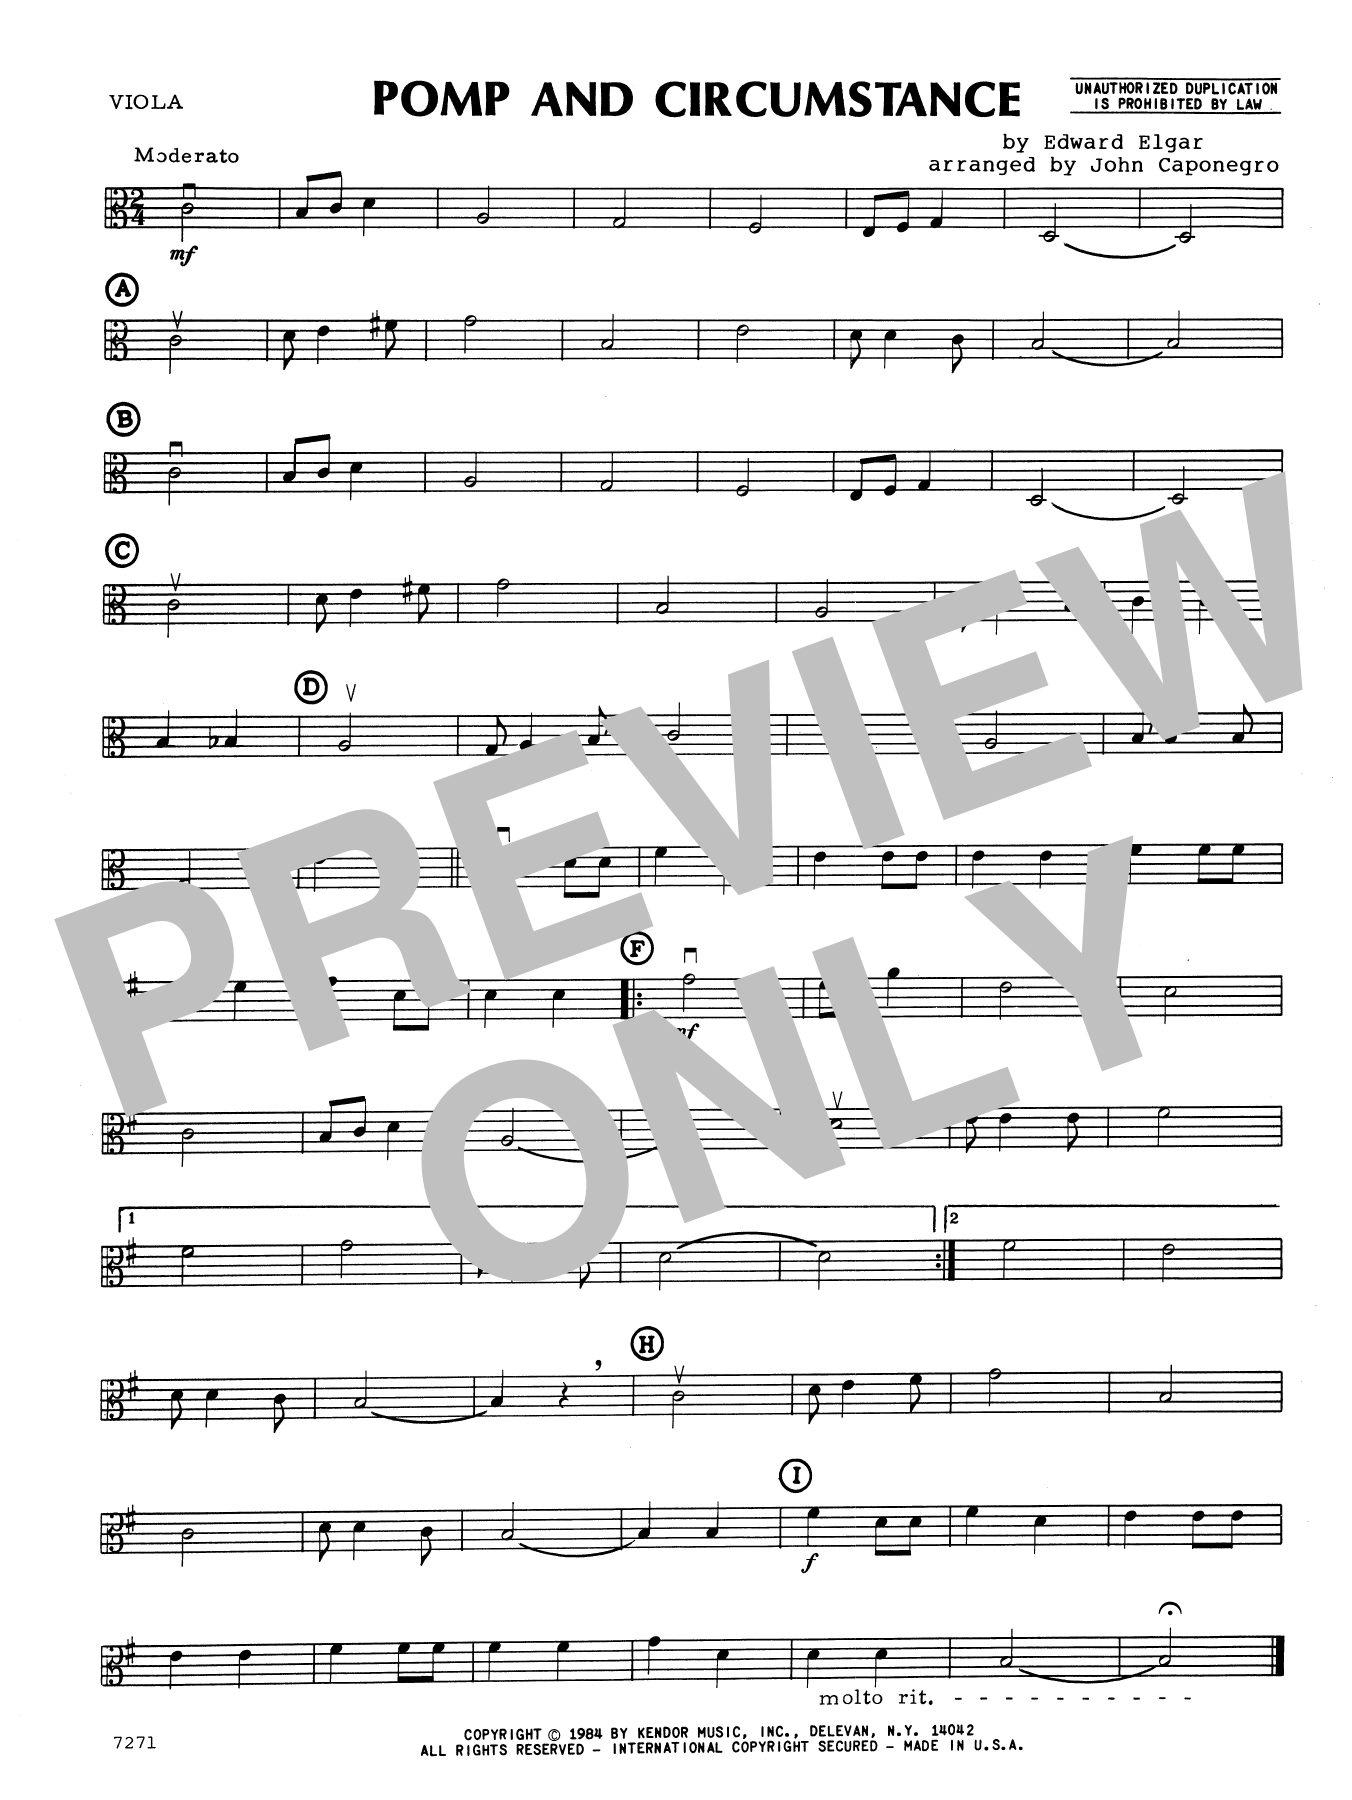 Download John Caponegro Pomp And Circumstance - Viola Sheet Music